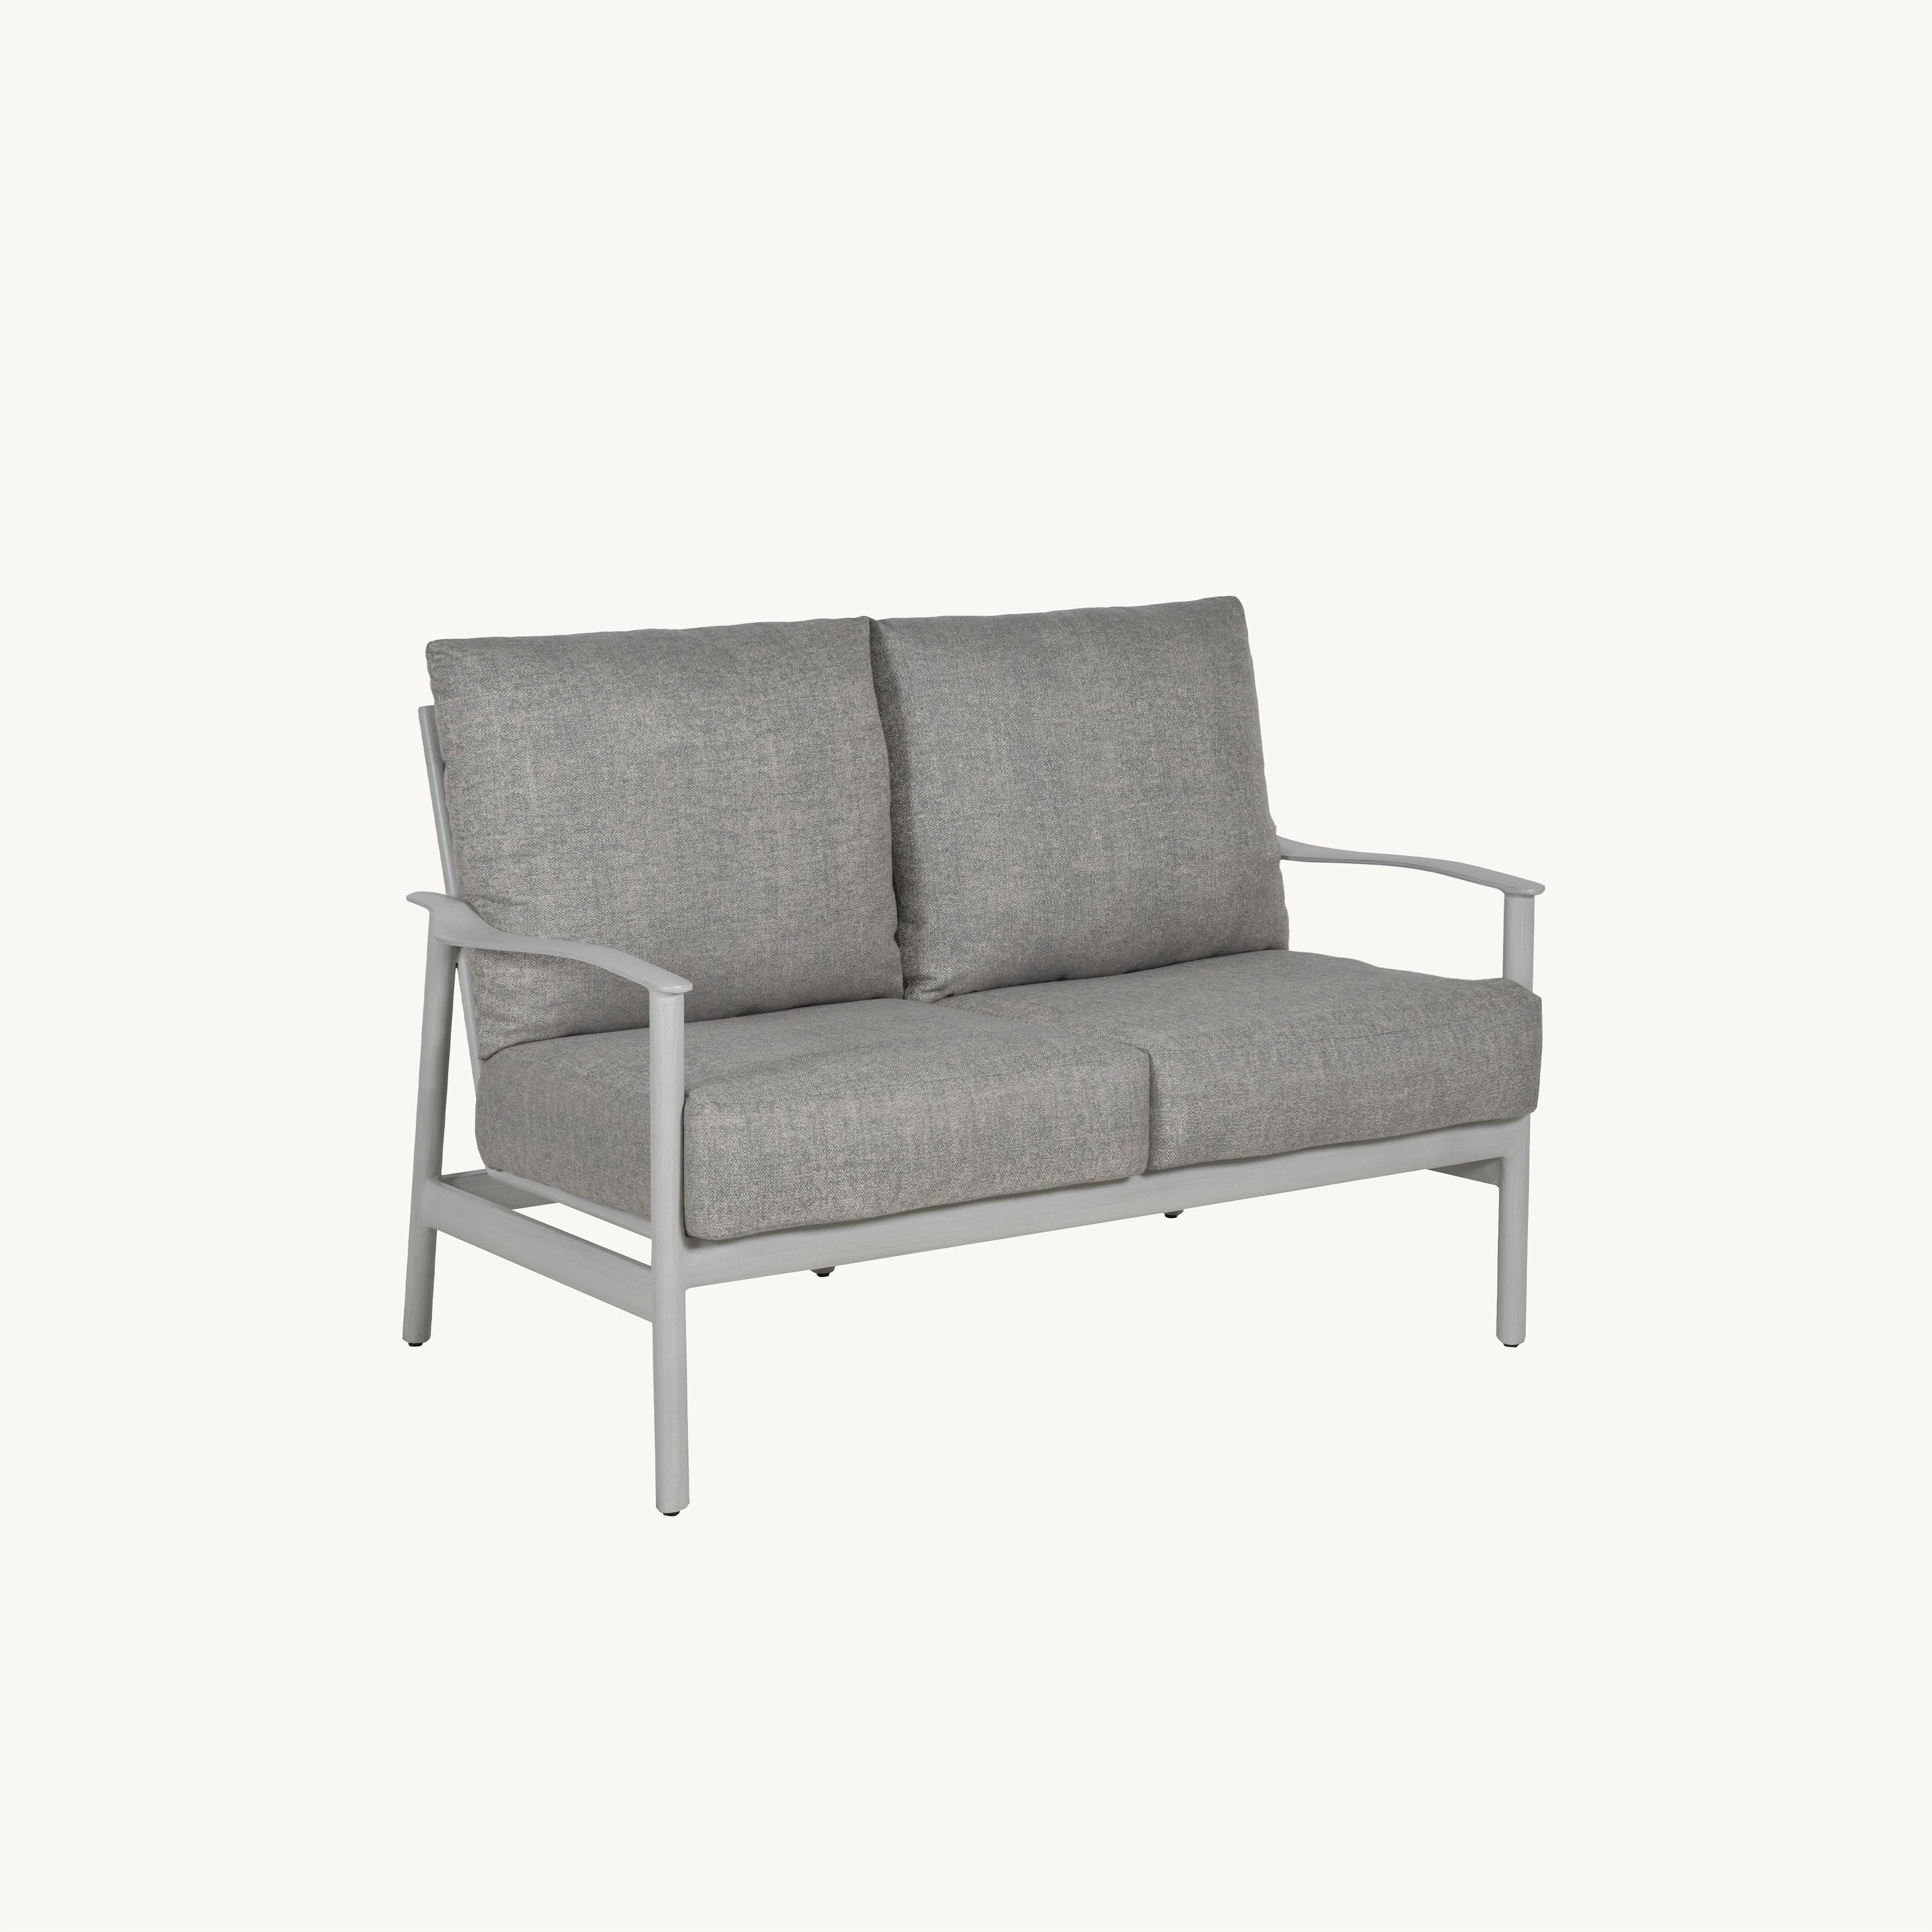 Barbados Cushion Lounge Loveseat By Castelle